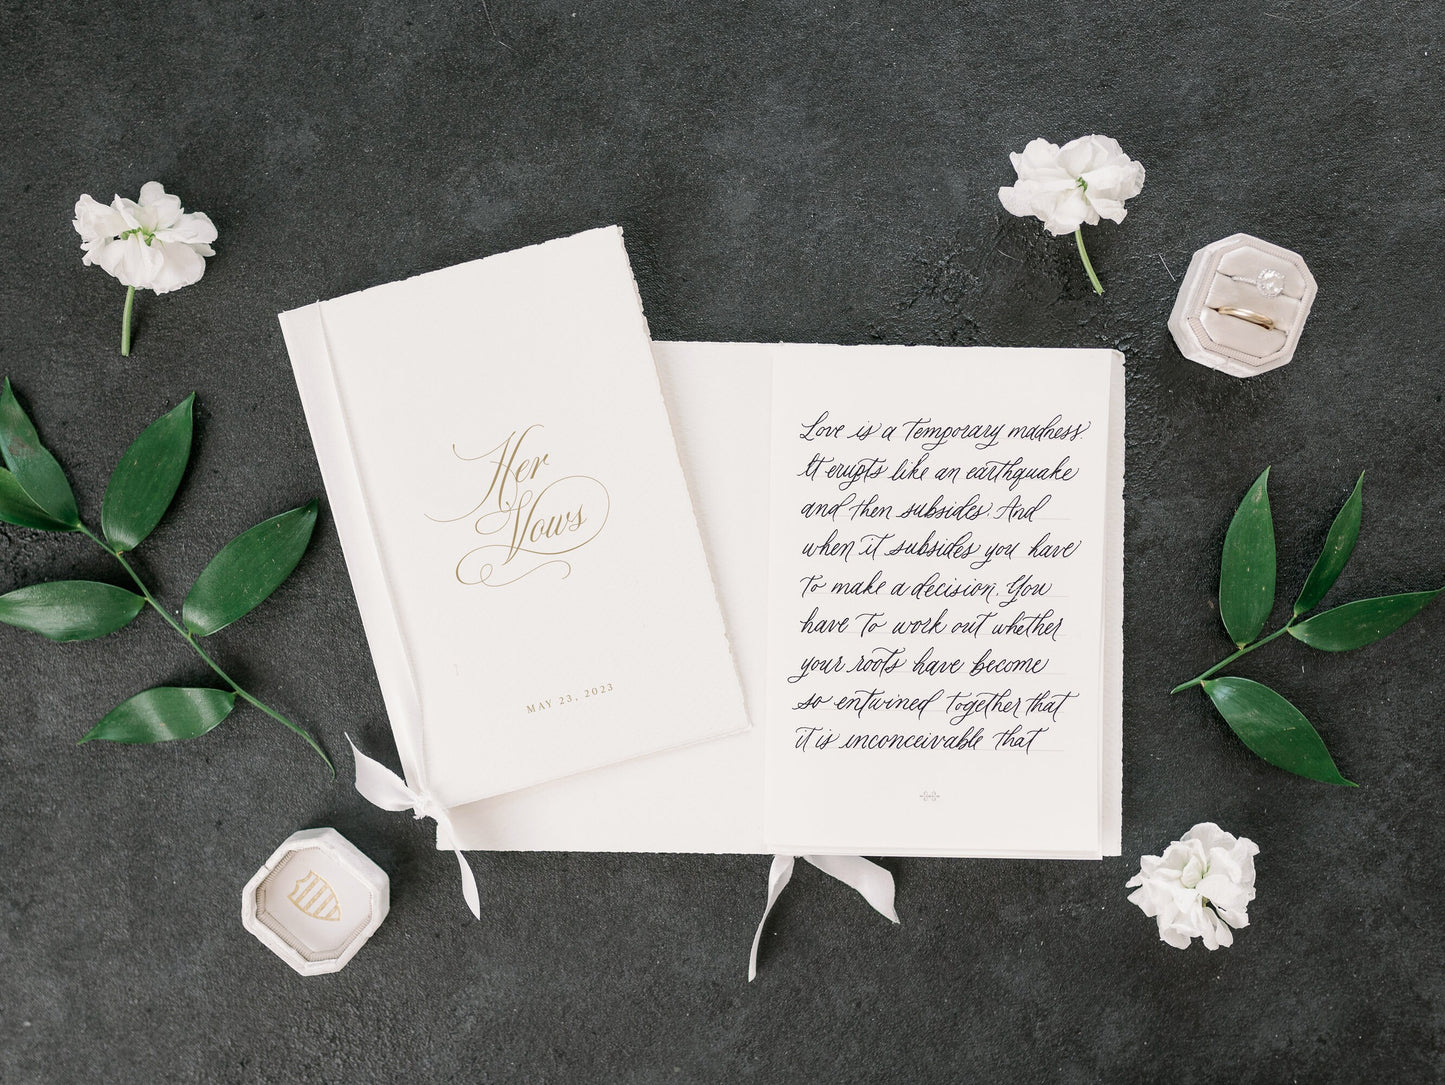 Her Vows Bridal Vow Book